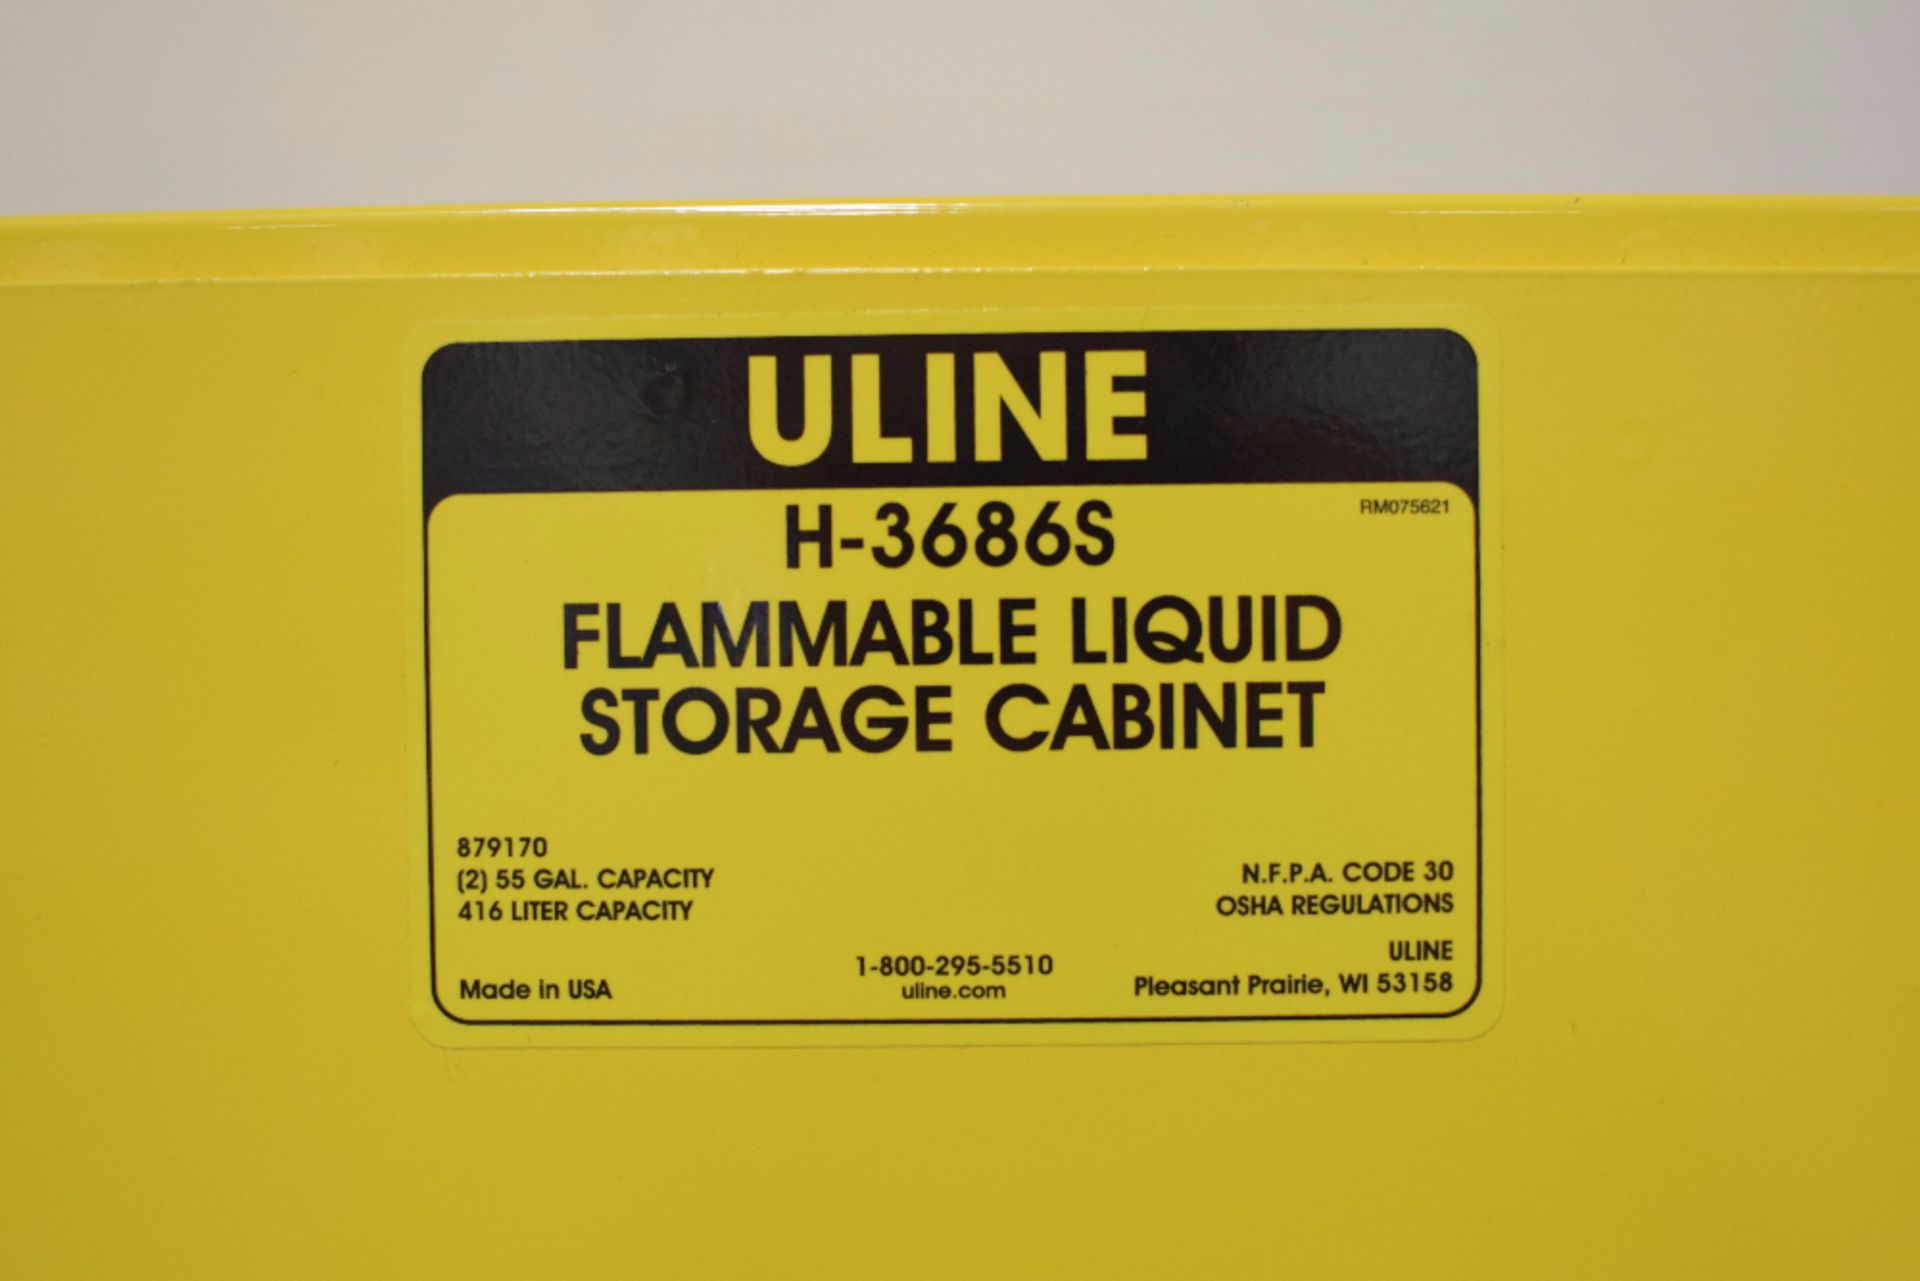 ULINE 110 Gallon Flammable Drum Storage Cabinet - Image 3 of 3